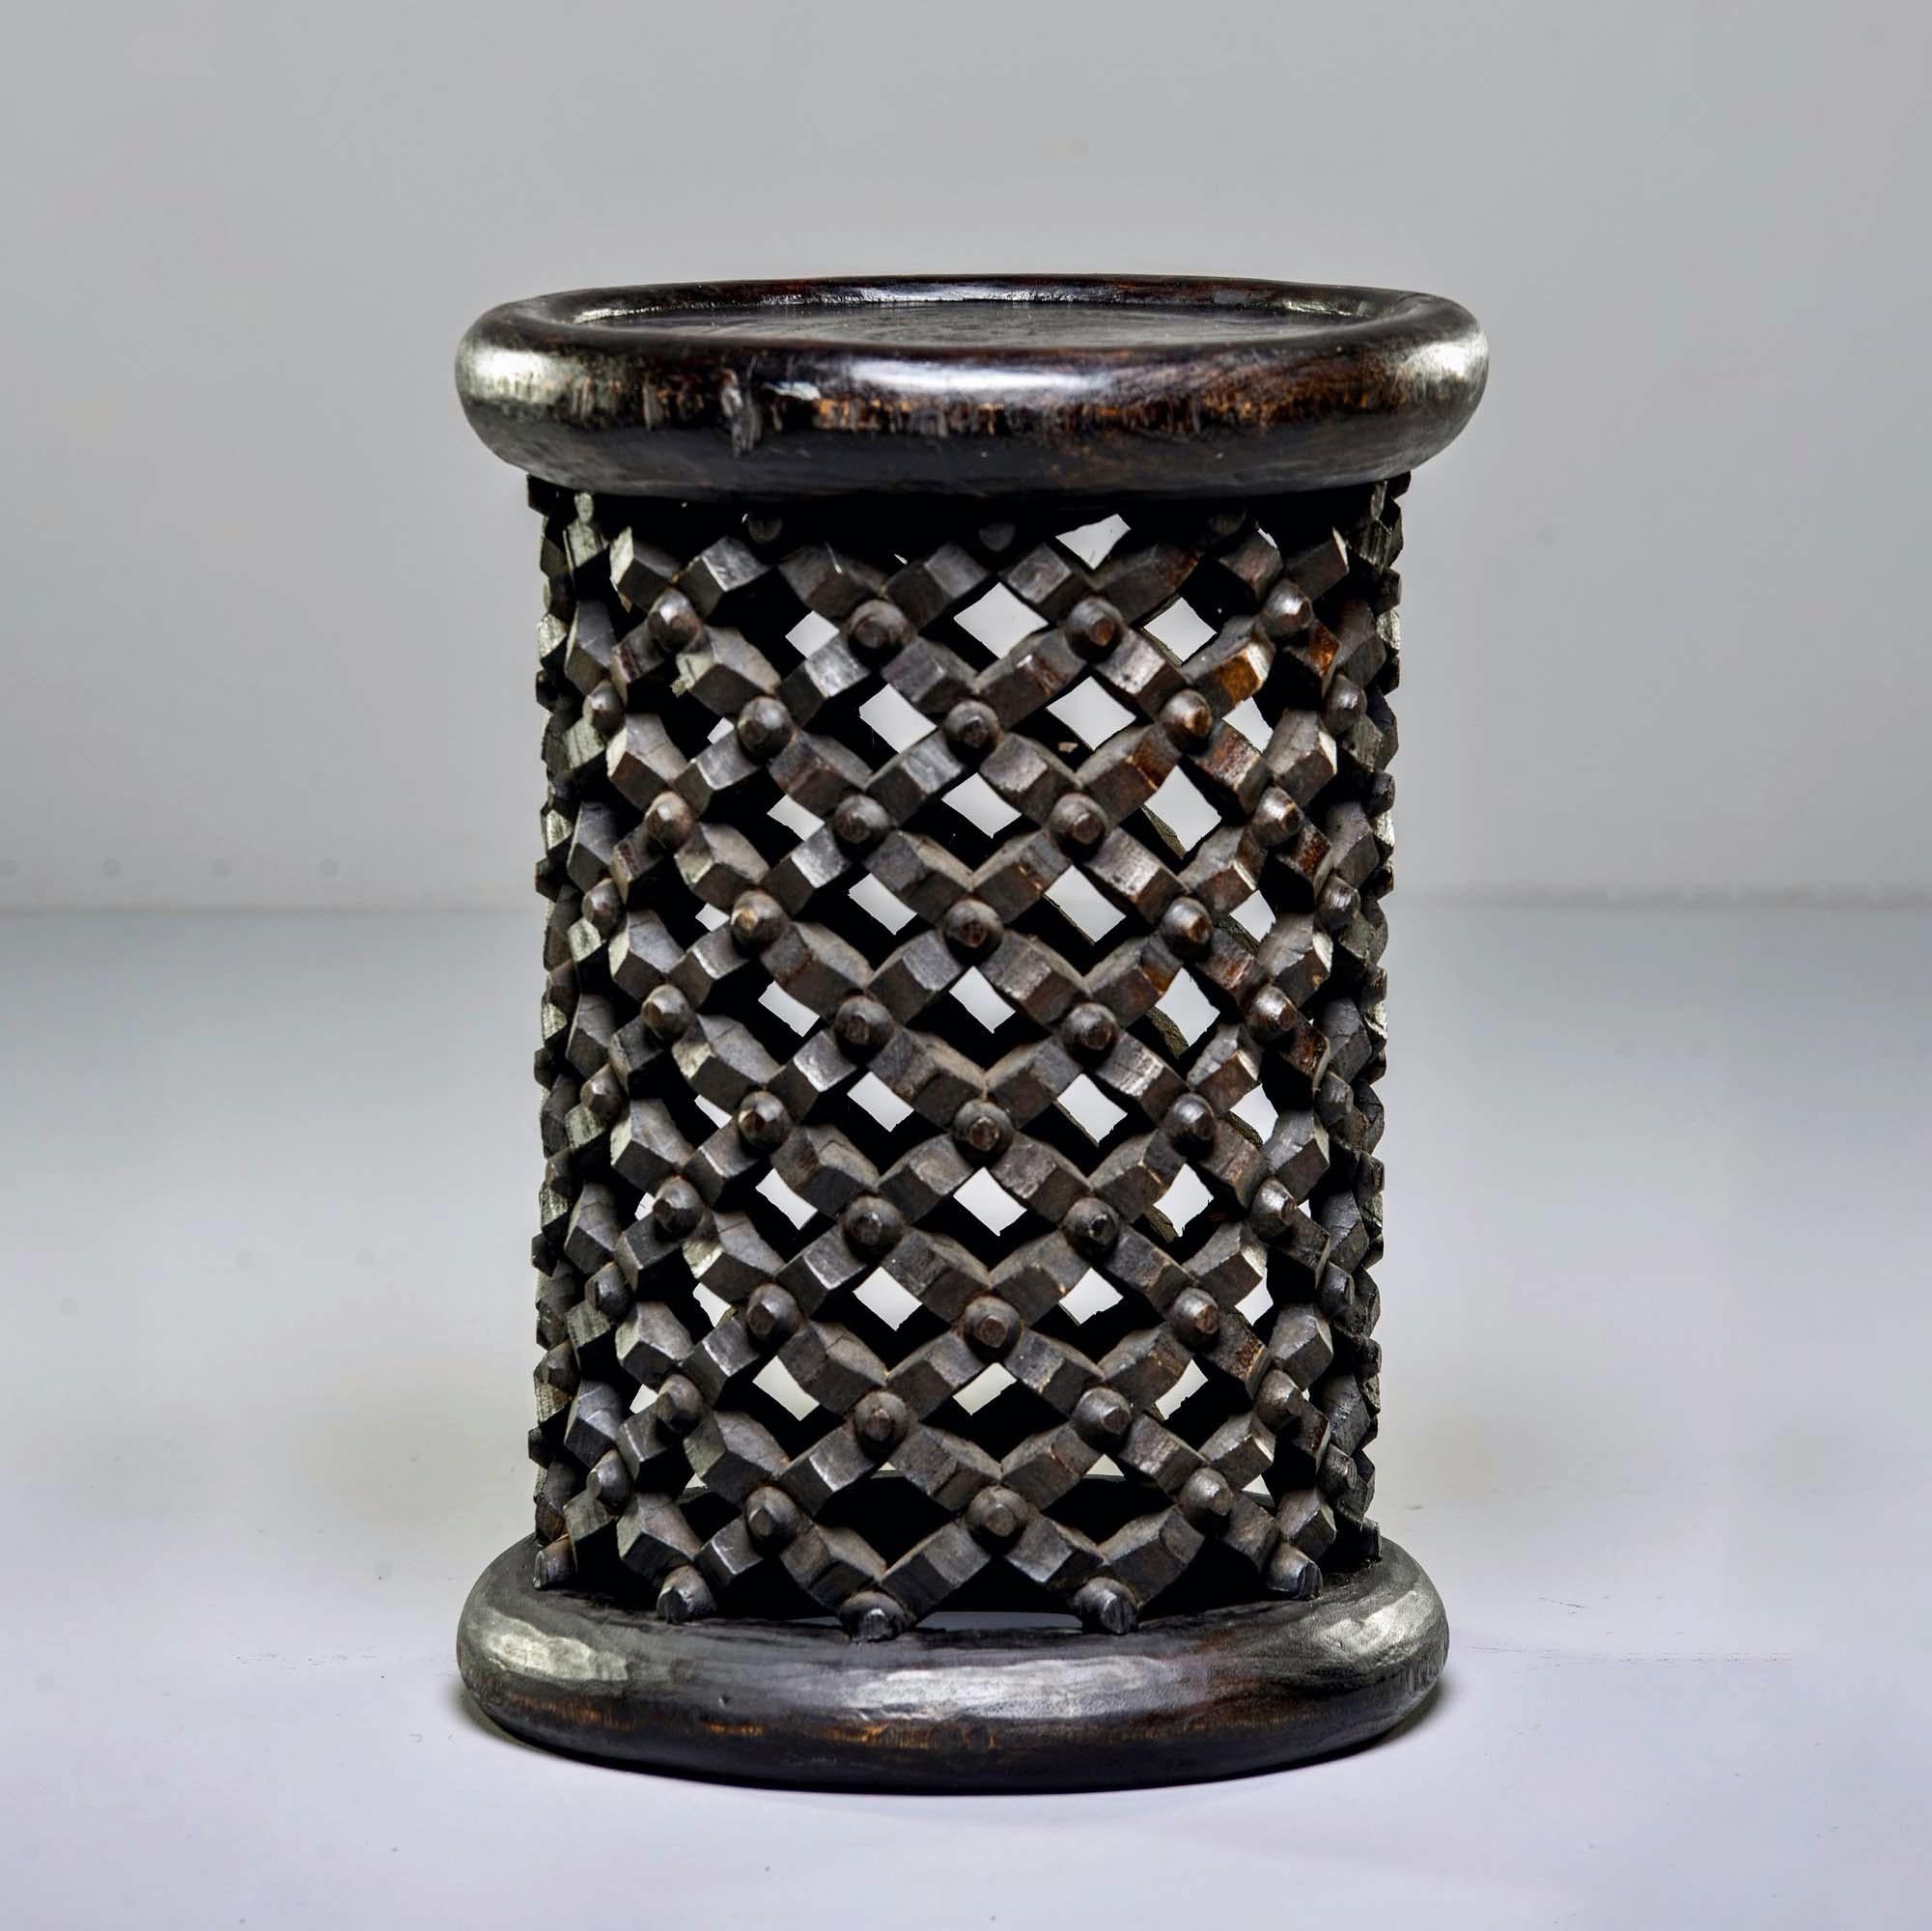 This circa 1980s hand carved narrow pedestal style stool or side table was made from a single piece of wood by the Bamileke people of Cameroon. The intricate knobby carved lattice work of the base symbolizes life’s webs that bind us together. Sold